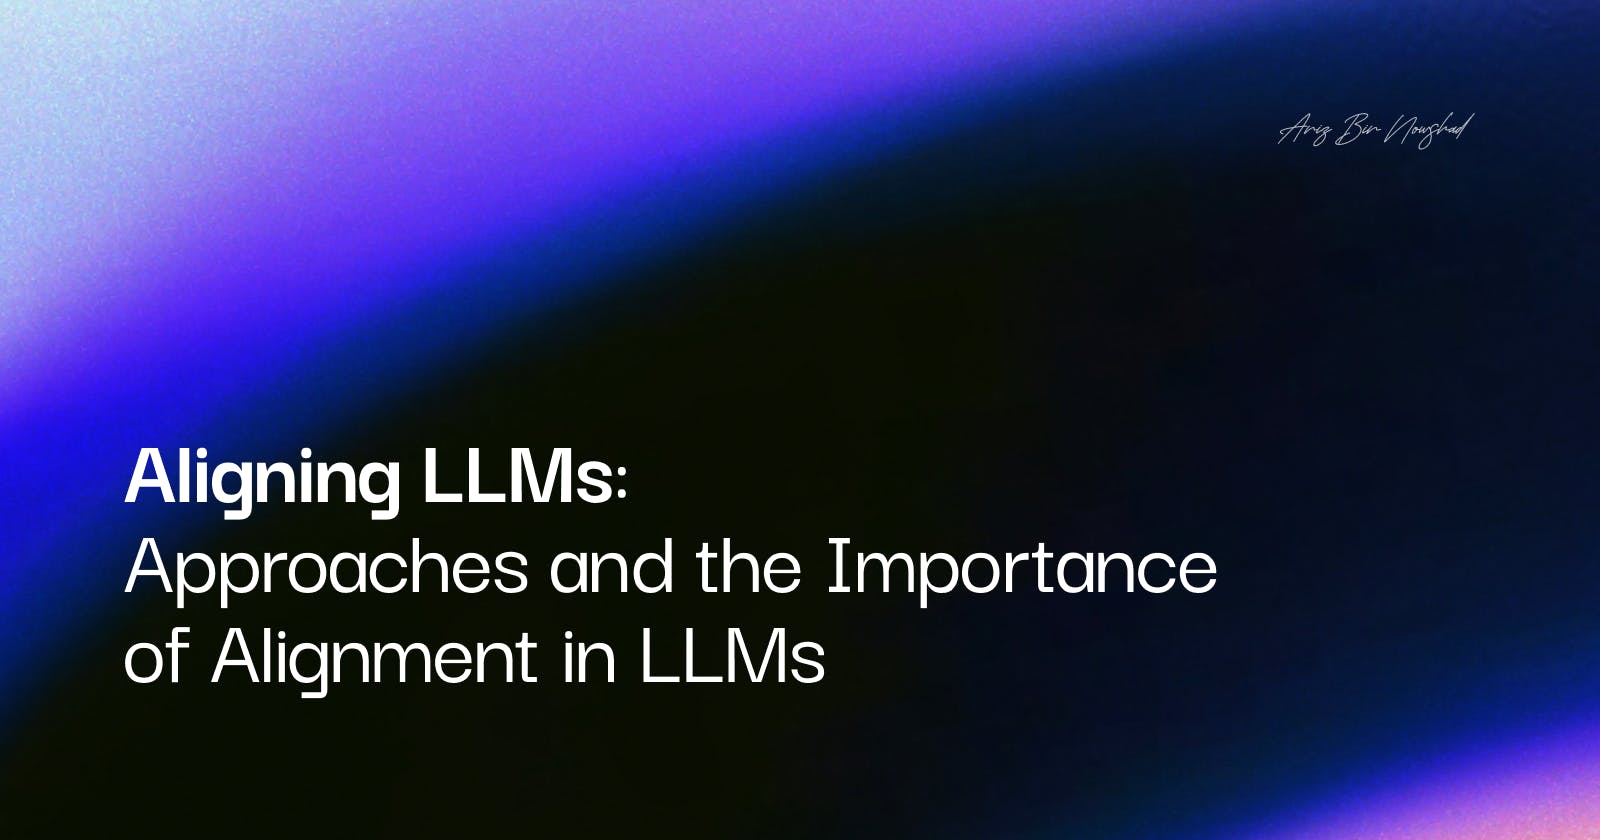 Aligning LLMs: Approaches and the Importance of Alignment in LLMs